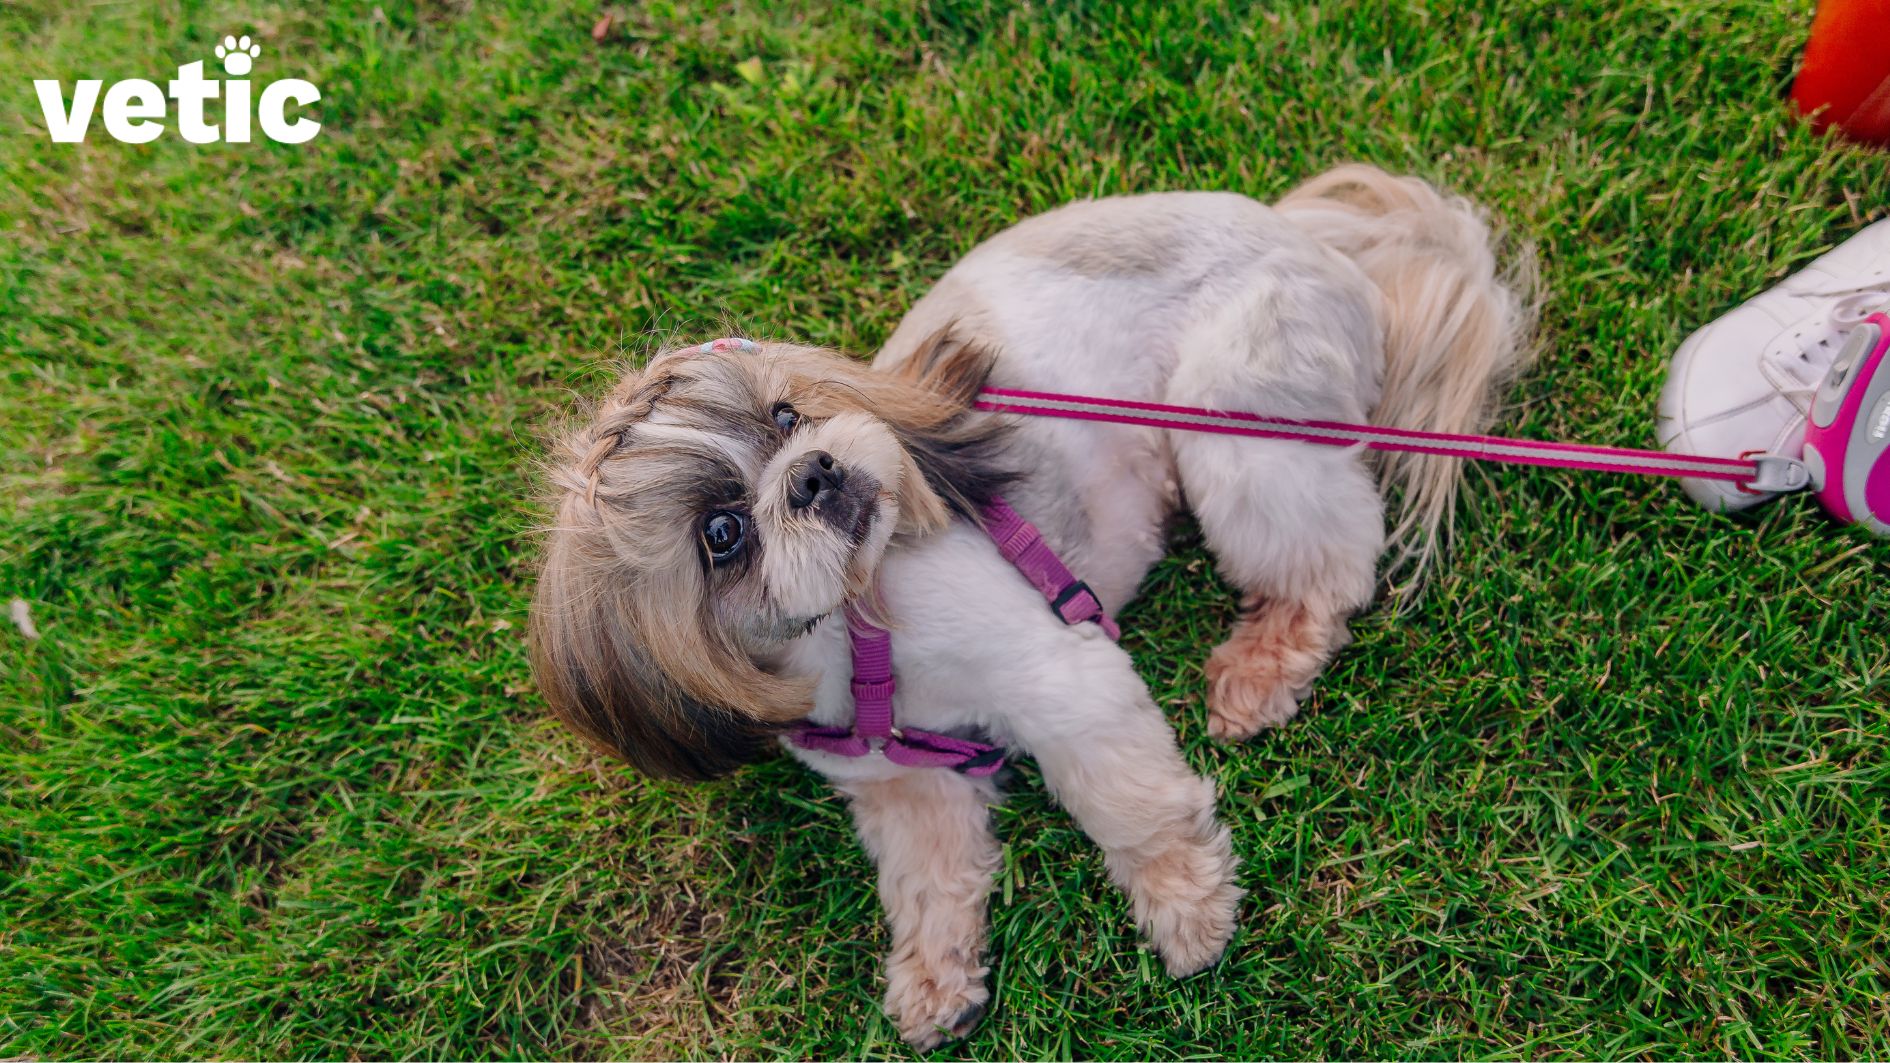 Funny Shih Tzu Breed adult dog lying on green grass outdoors, looking up at their human. the dog is wearing a purple harness with a pink and white retractable leash.